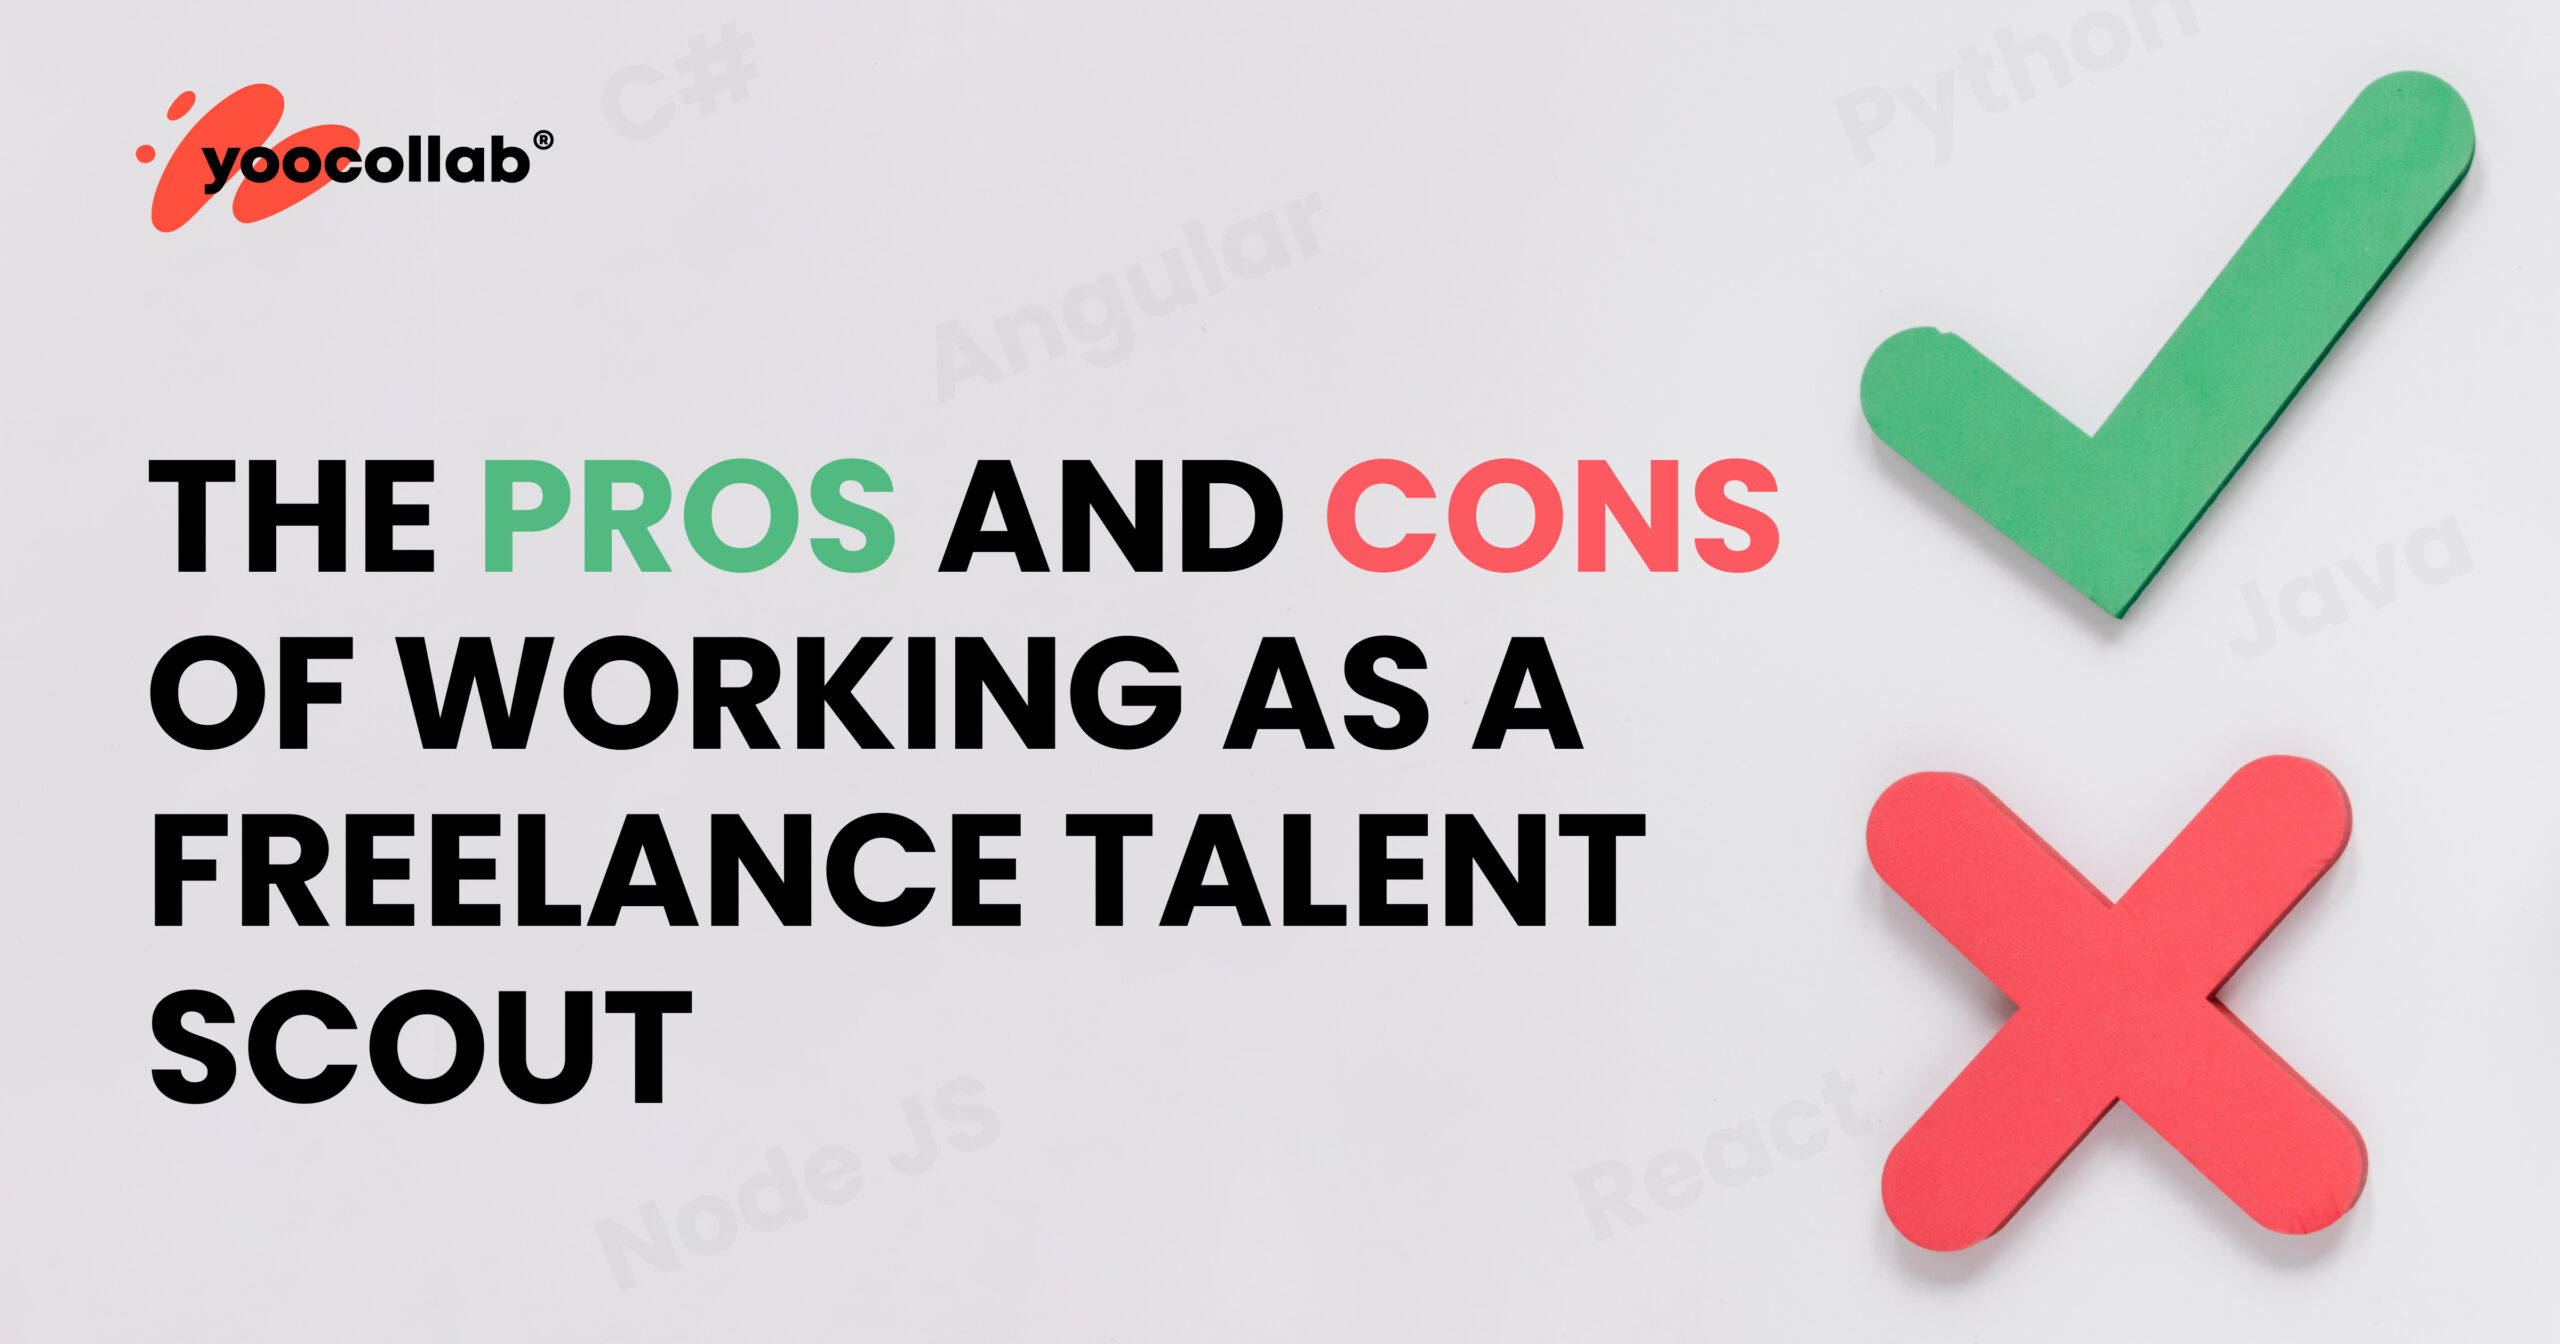 The Pros and Cons of Working as a Freelance Talent Scout